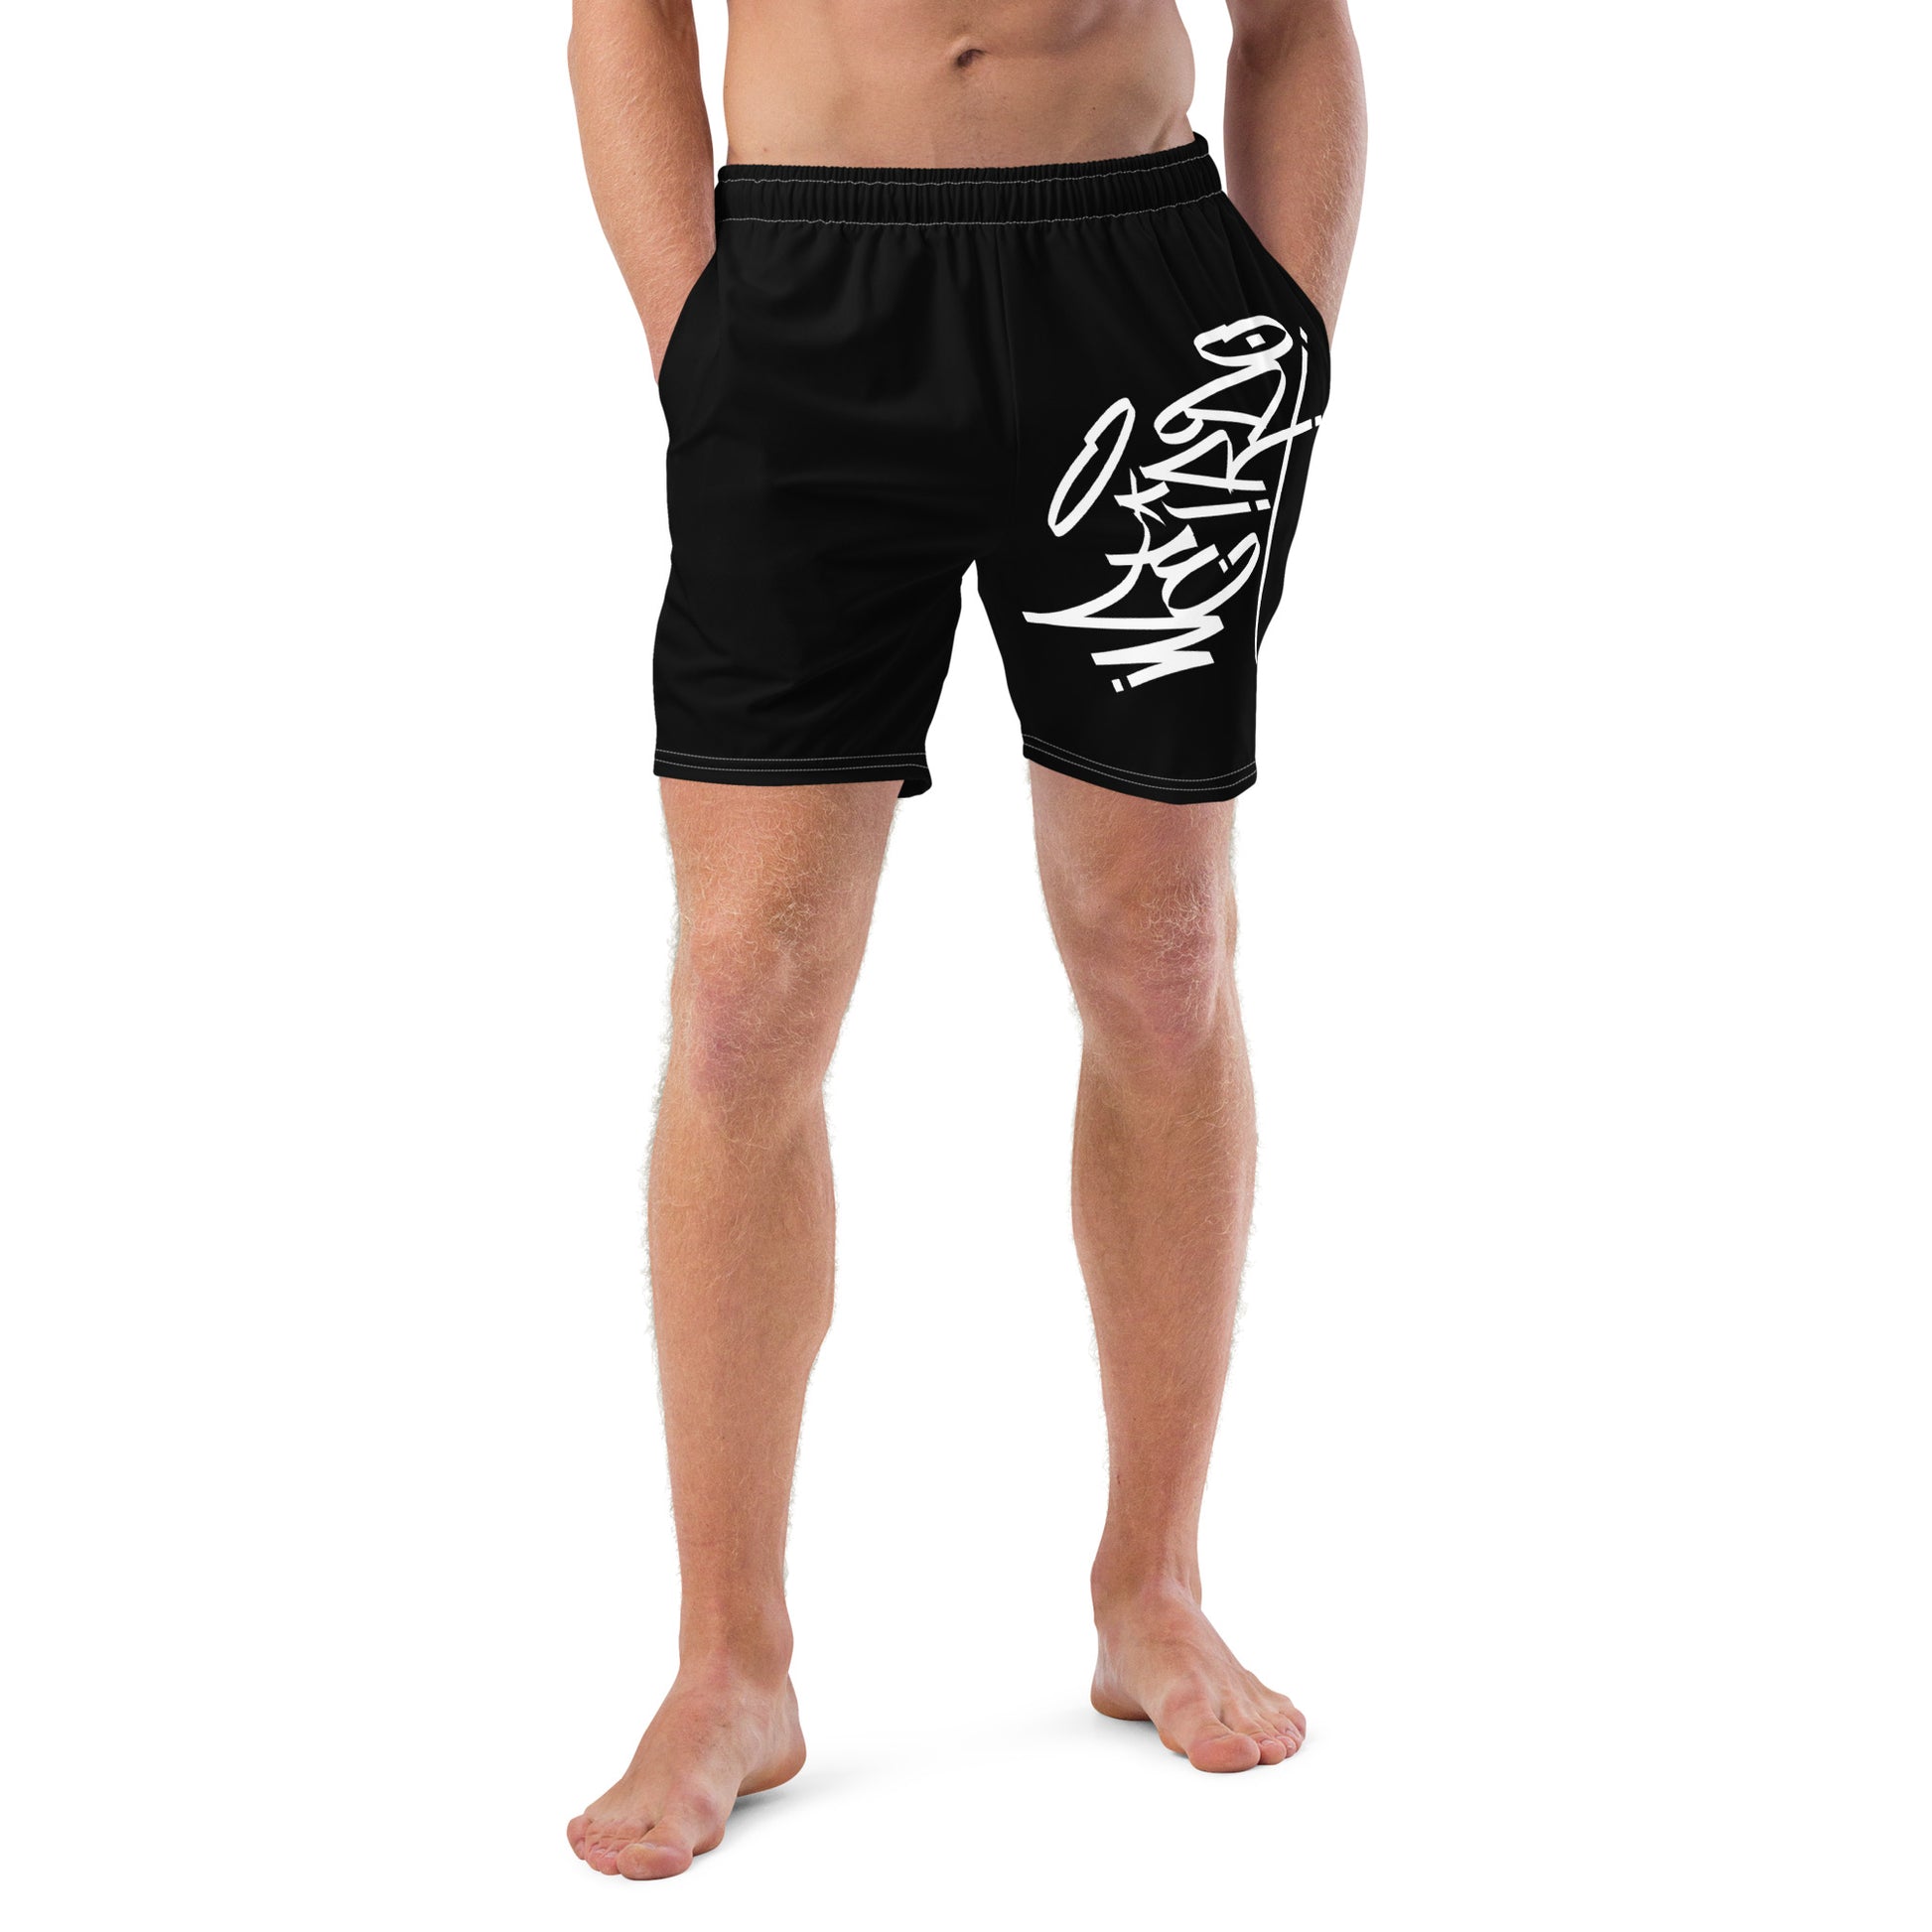 man wearing weirdo tag swim shorts black by B.Different Clothing independent streetwear inspired by street art graffiti